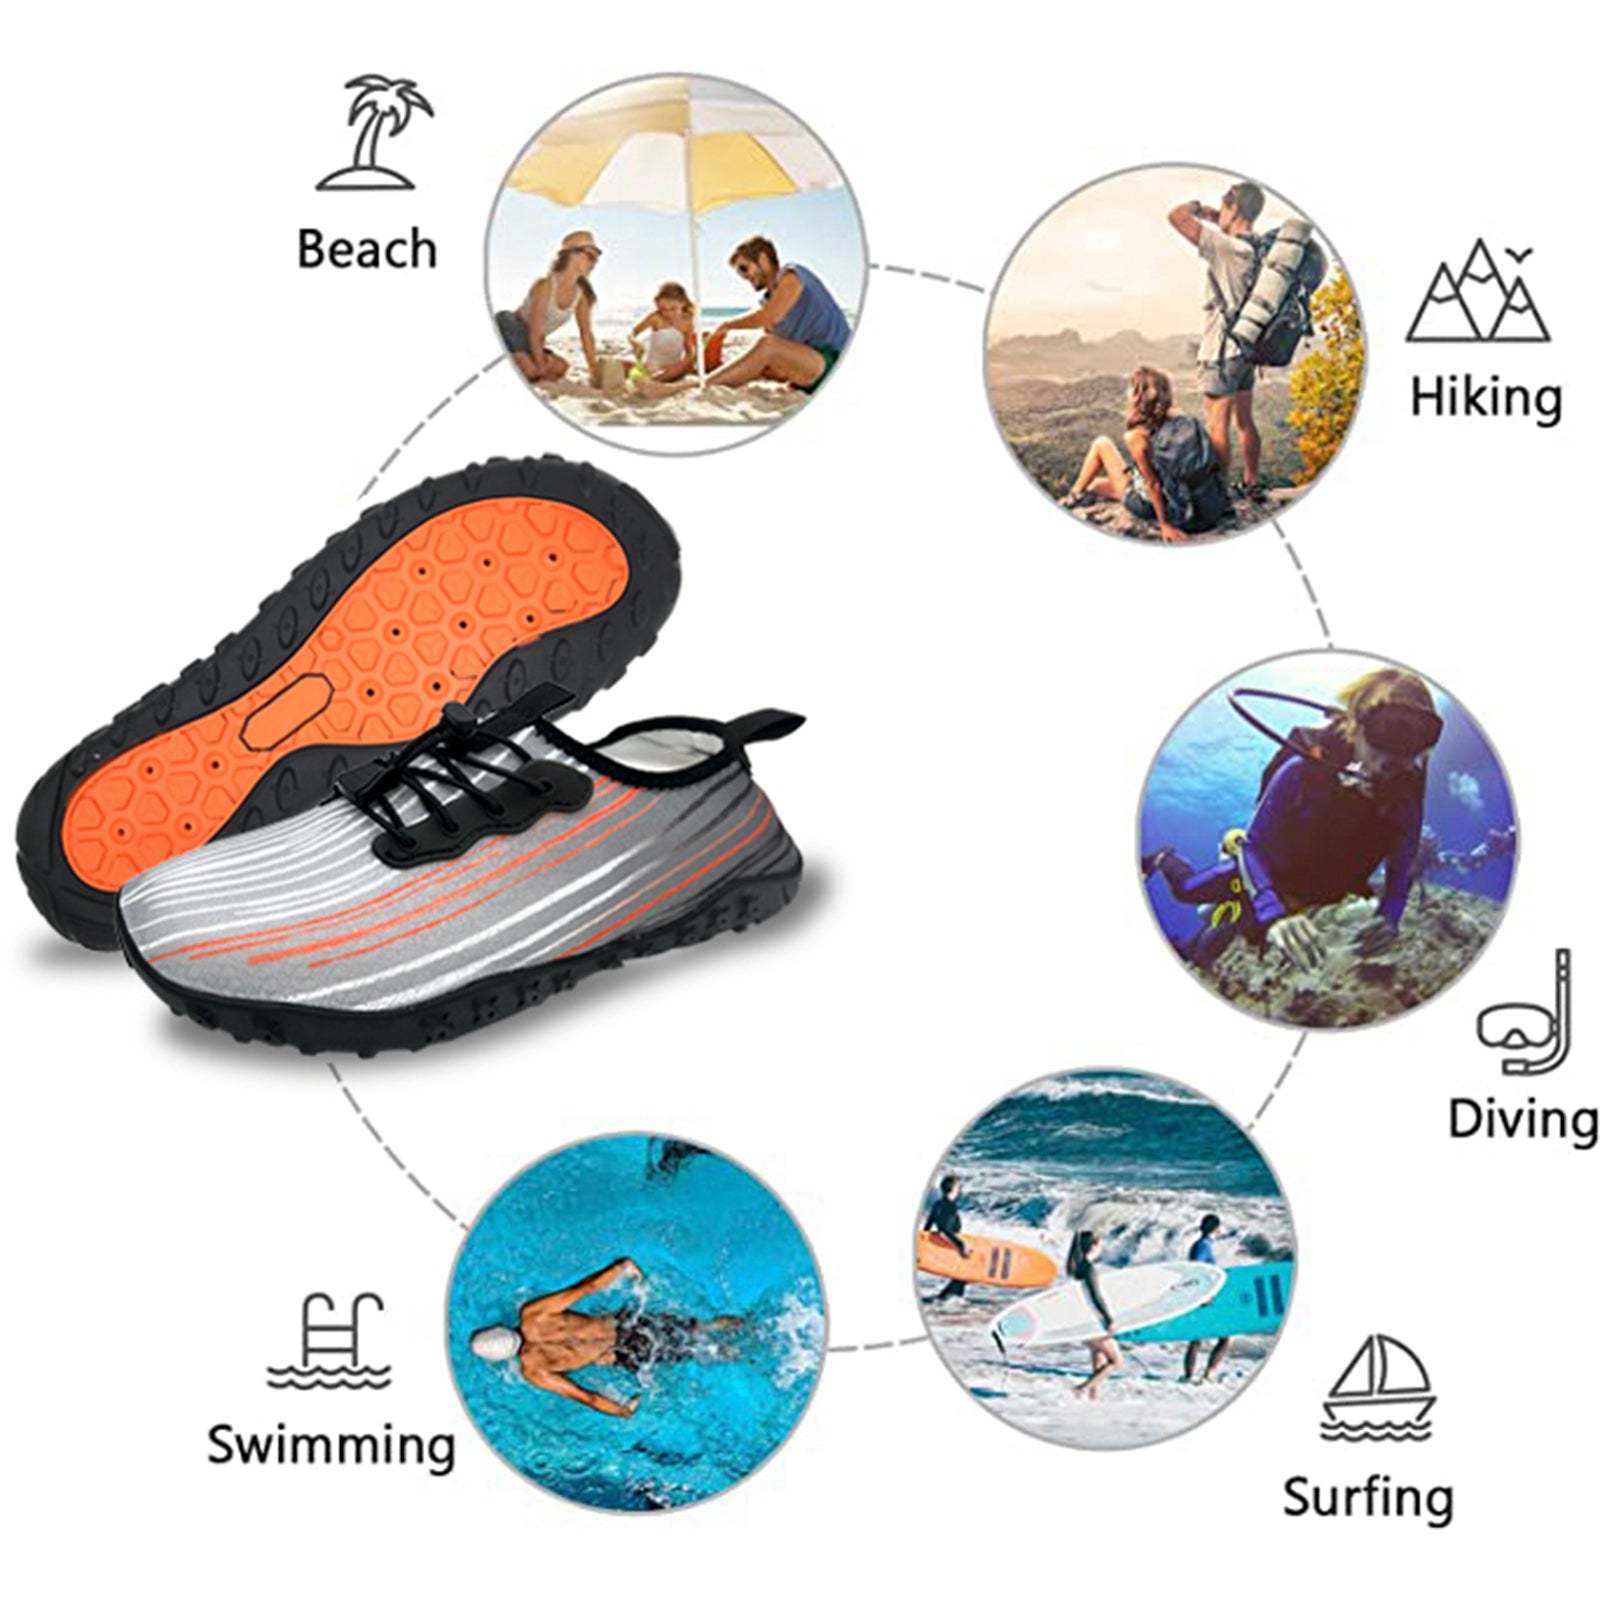 Water Shoes for Men and Women Soft Breathable Slip-on Aqua Shoes Aqua Socks for Swim Beach Pool Surf Yoga (Grey Size US 8.5) from Deals499 at Deals499